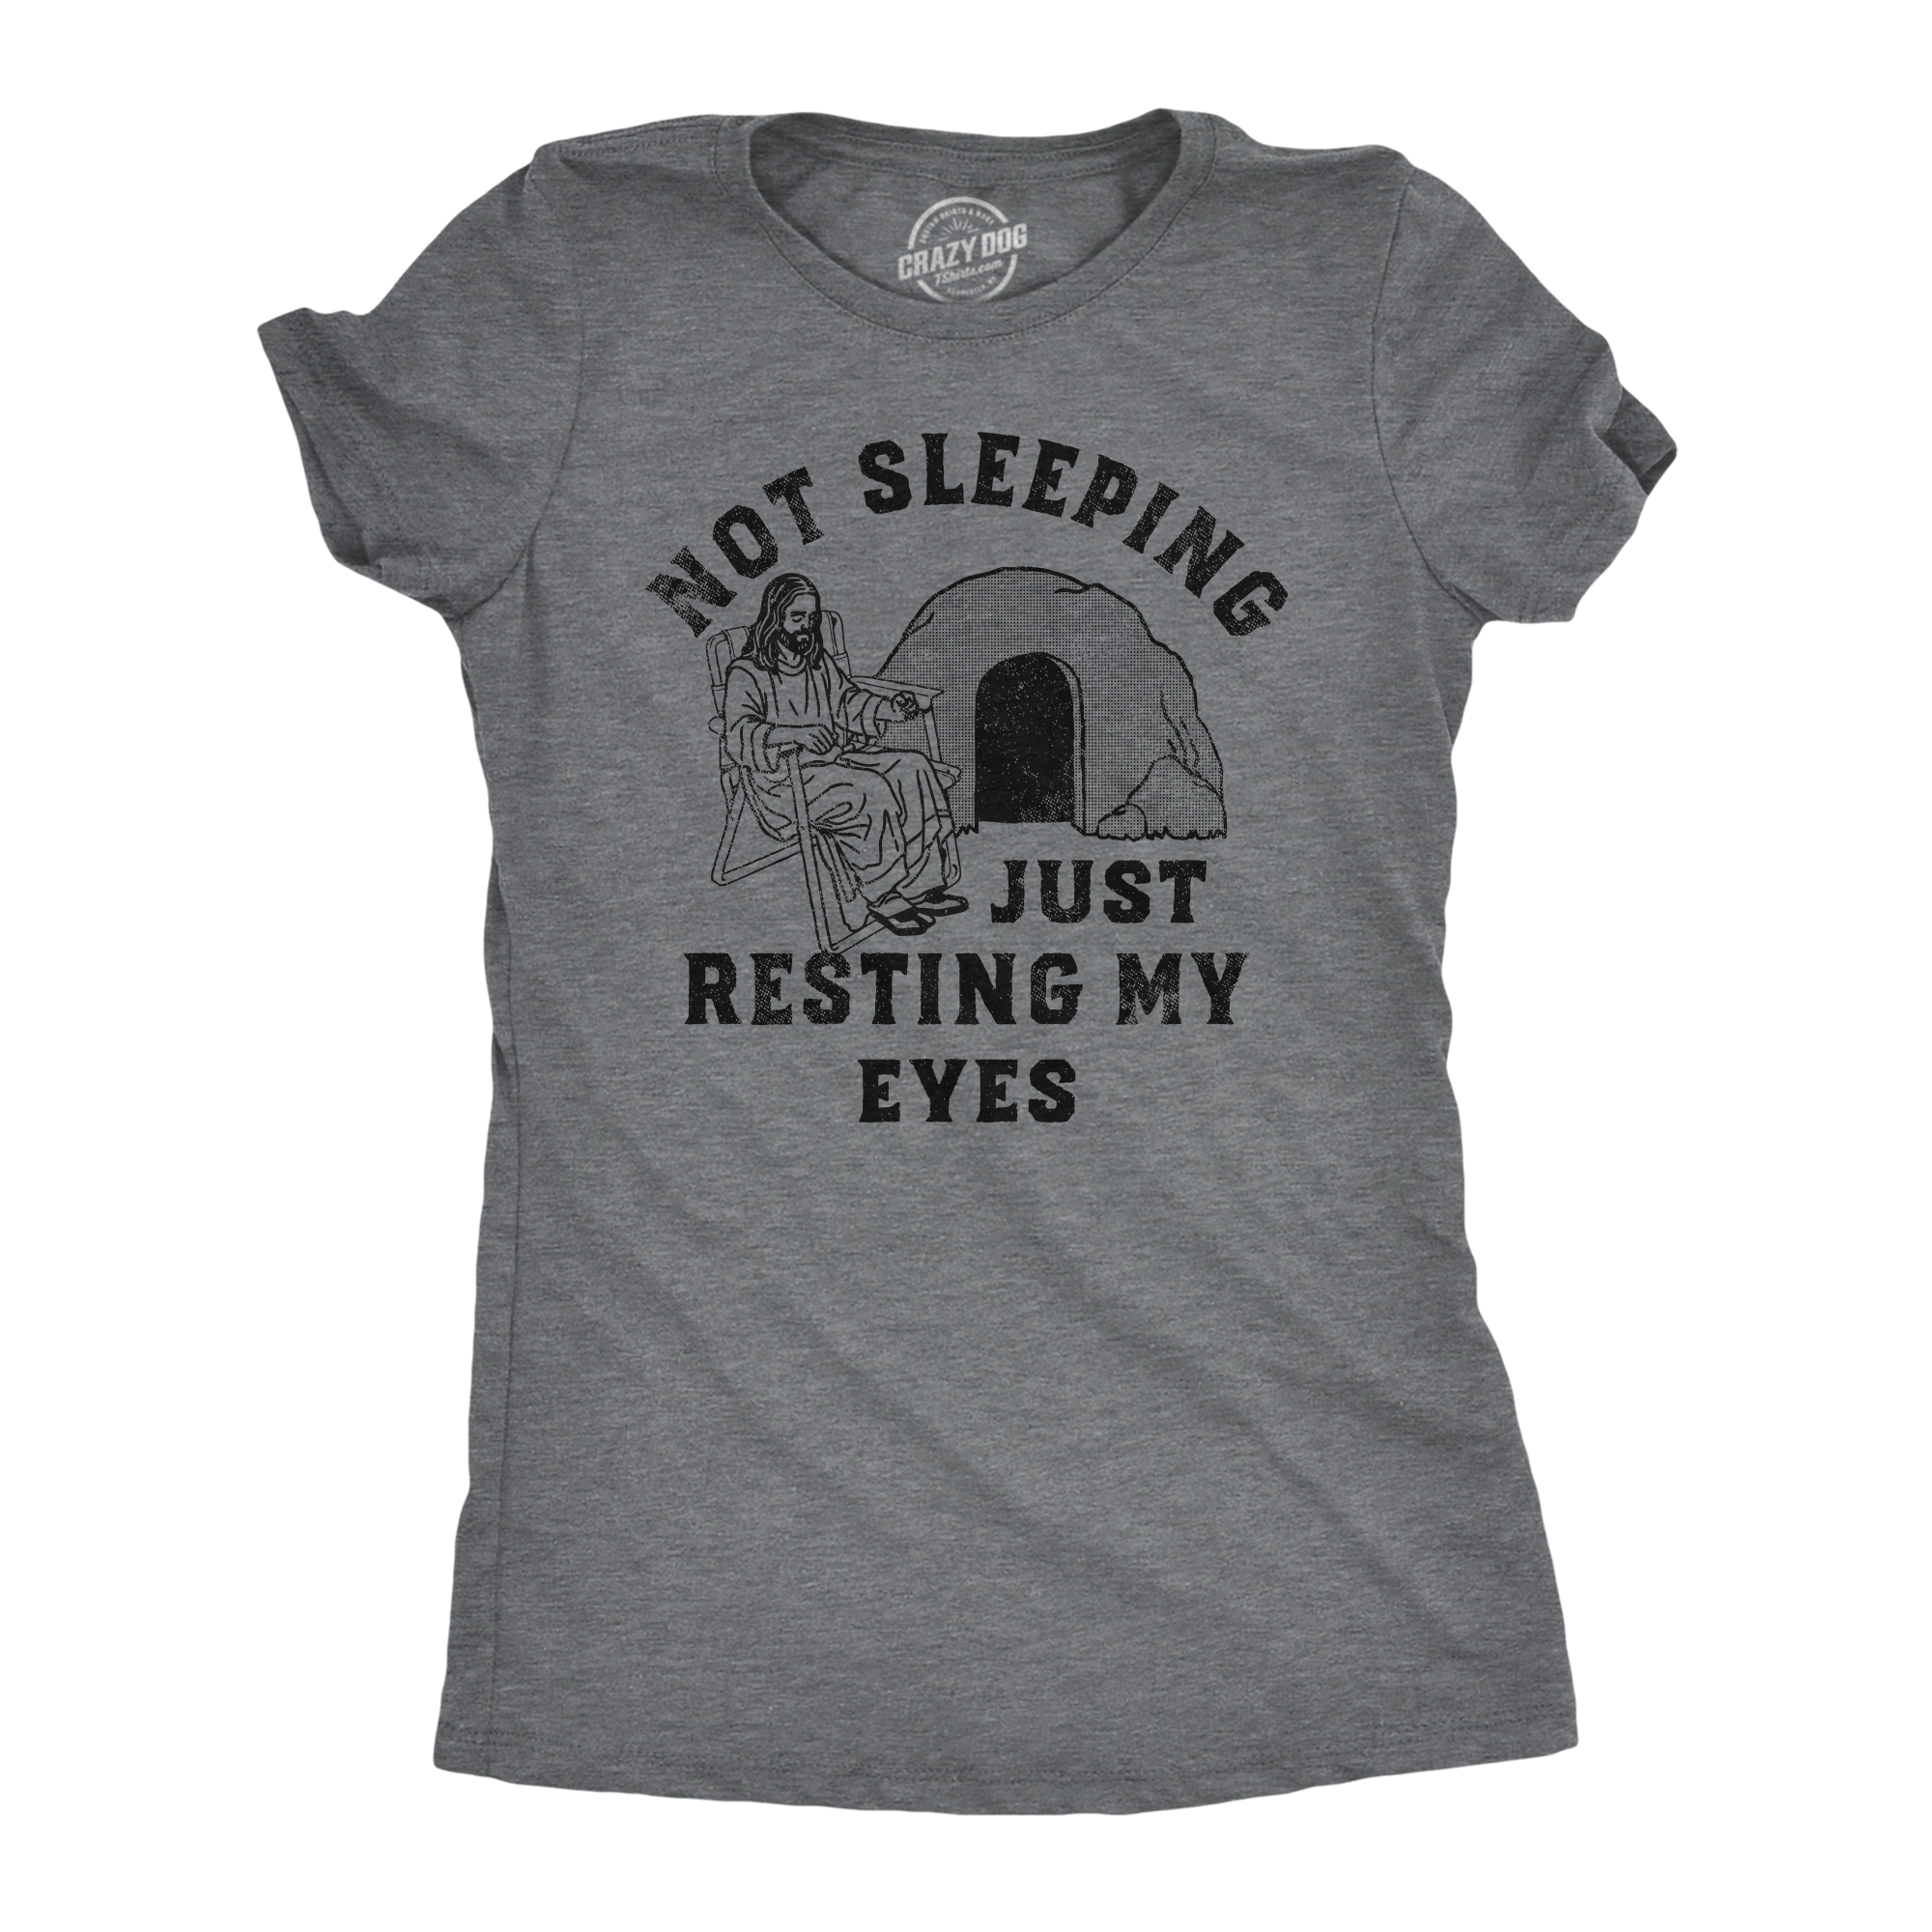 Funny Light Heather Grey - Not Sleeping Not Sleeping Just Resting My Eyes Womens T Shirt Nerdy Easter Sarcastic Tee